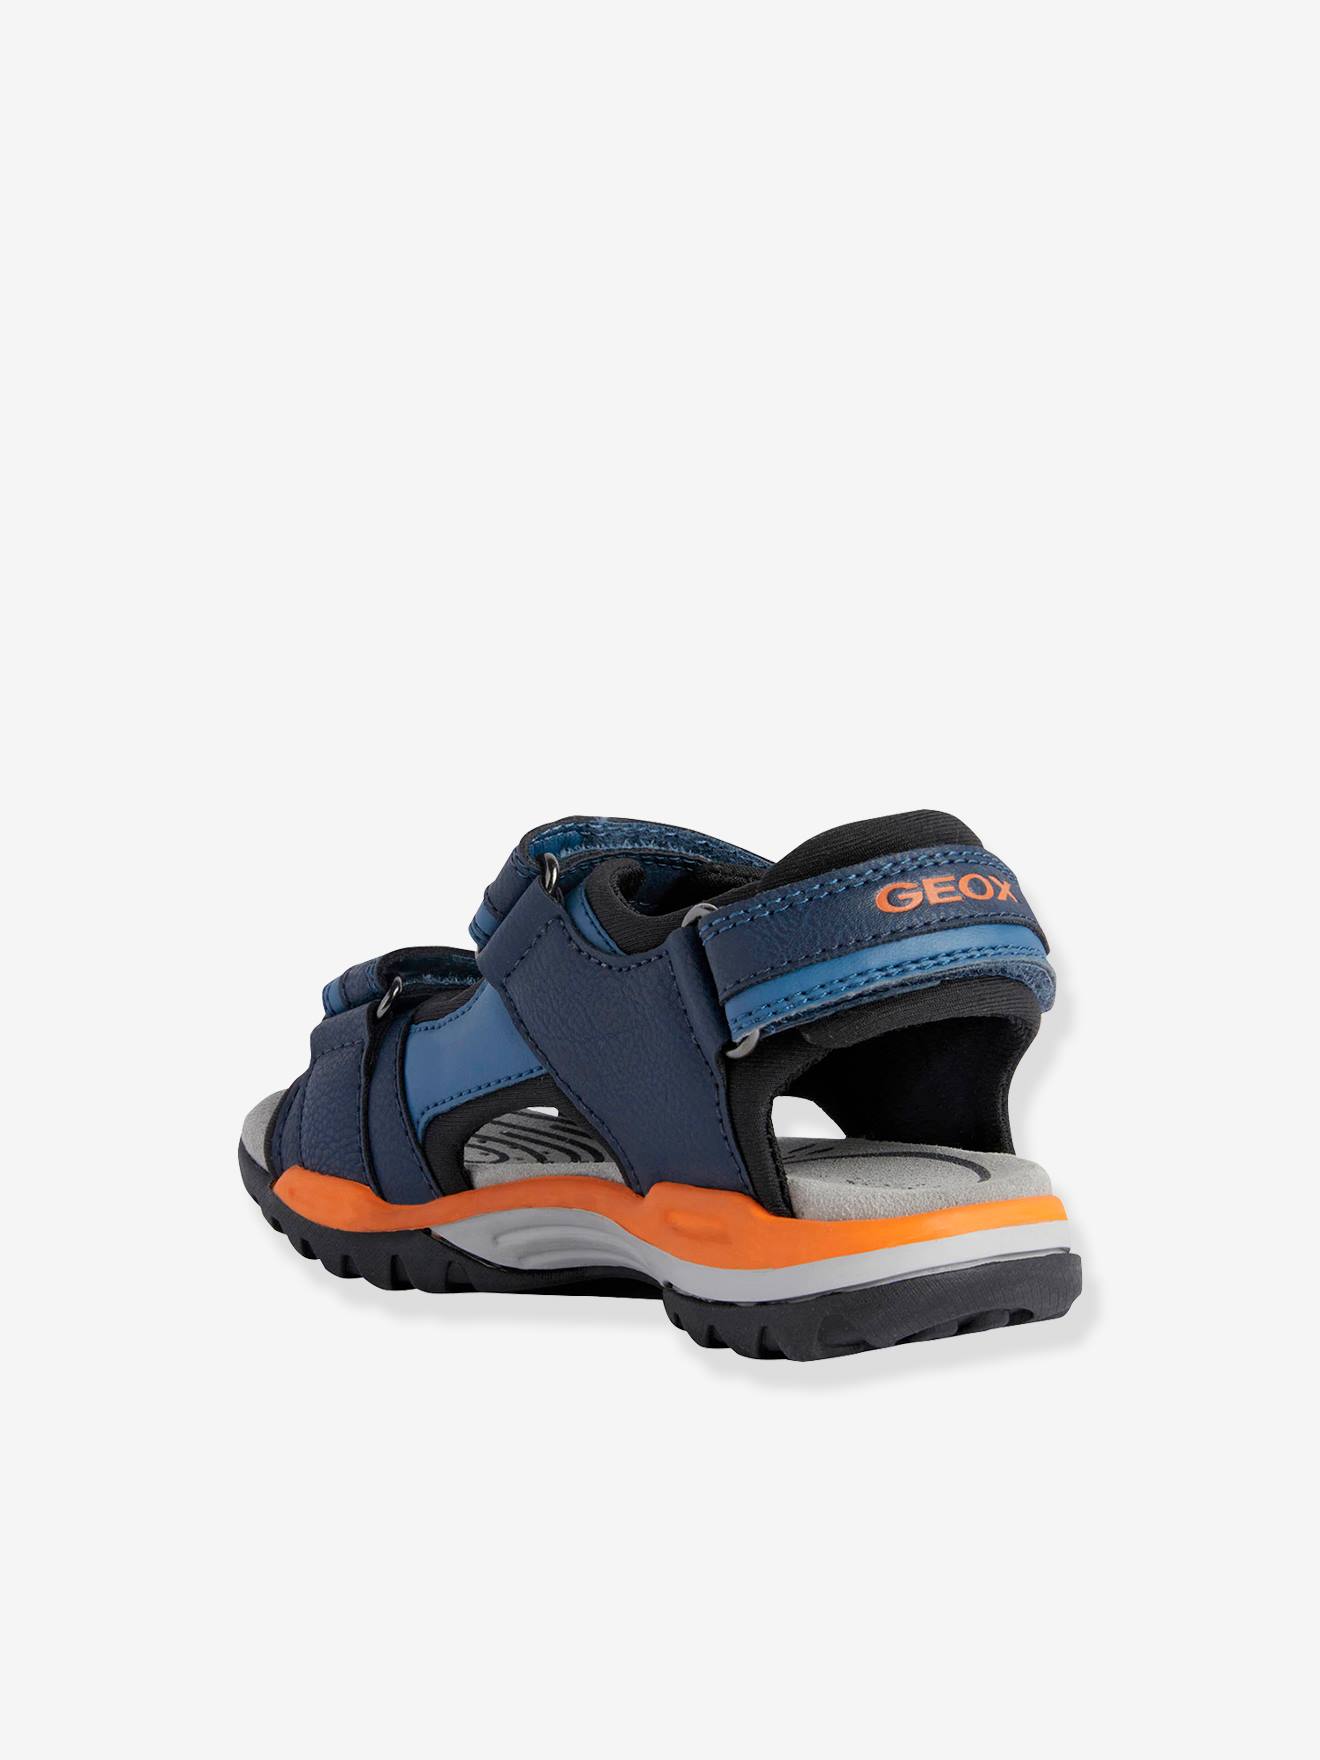 solid, Shoes B.A GEOX® Sandals medium by for Borealis - blue Boys, J.